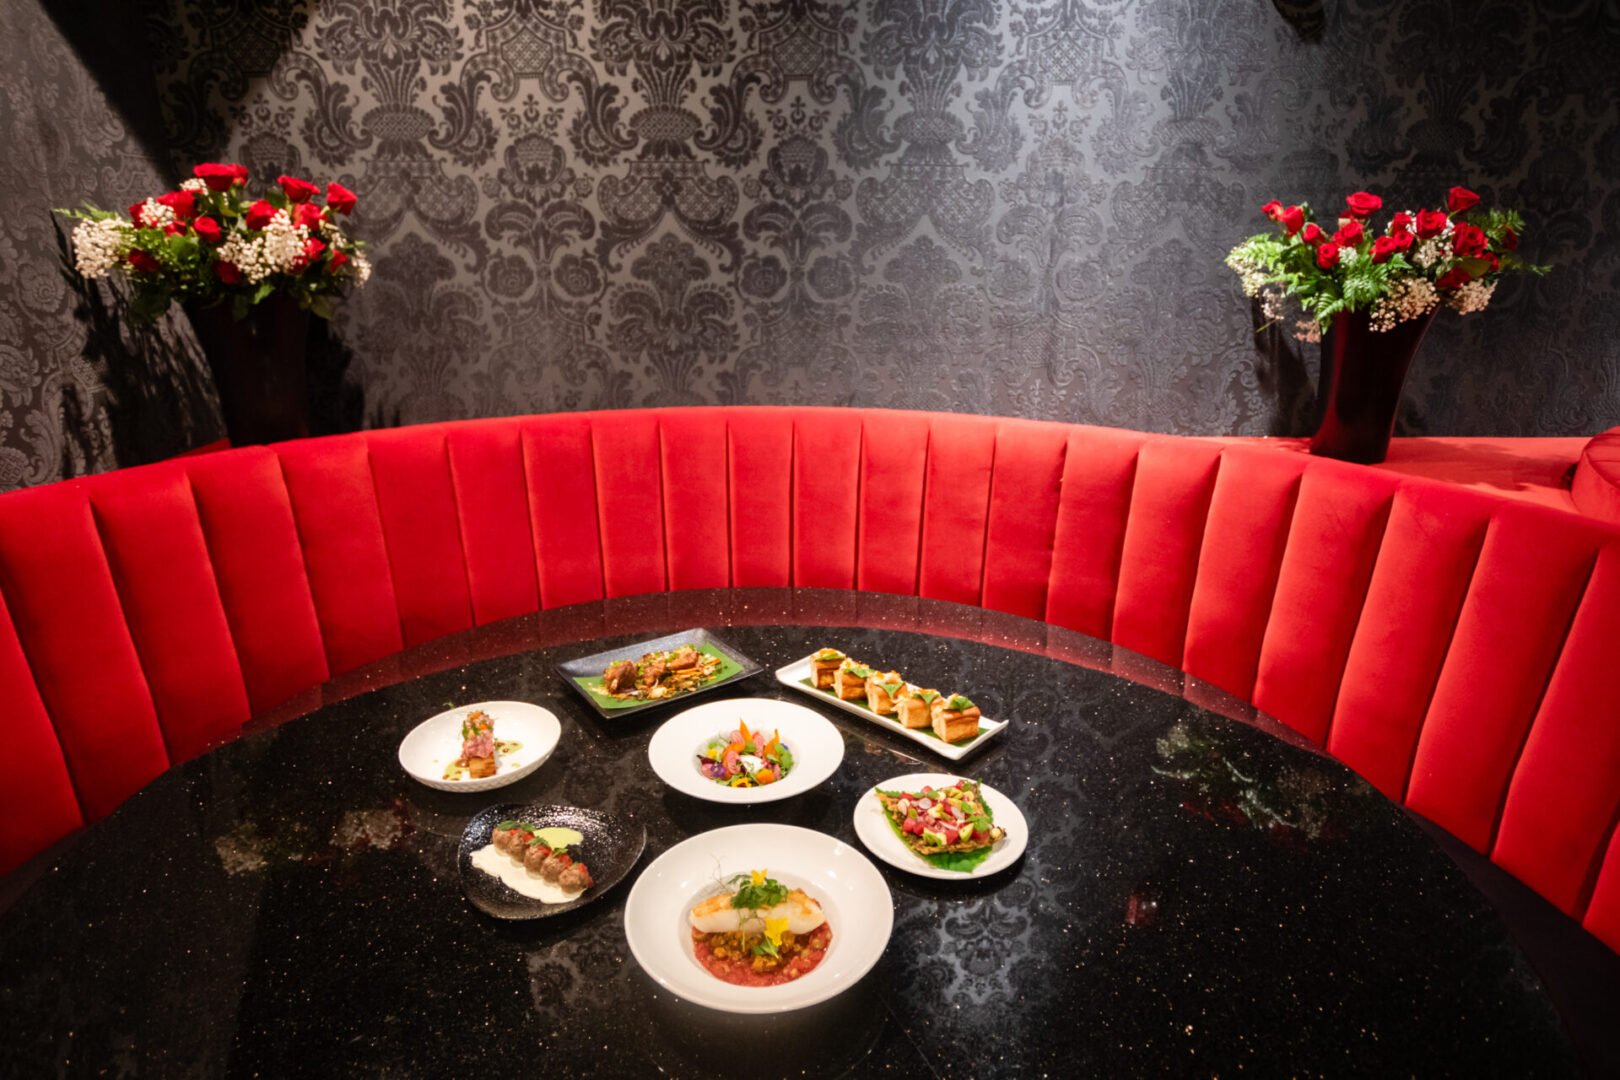 A table in a luxury lounge with plates of food on it.